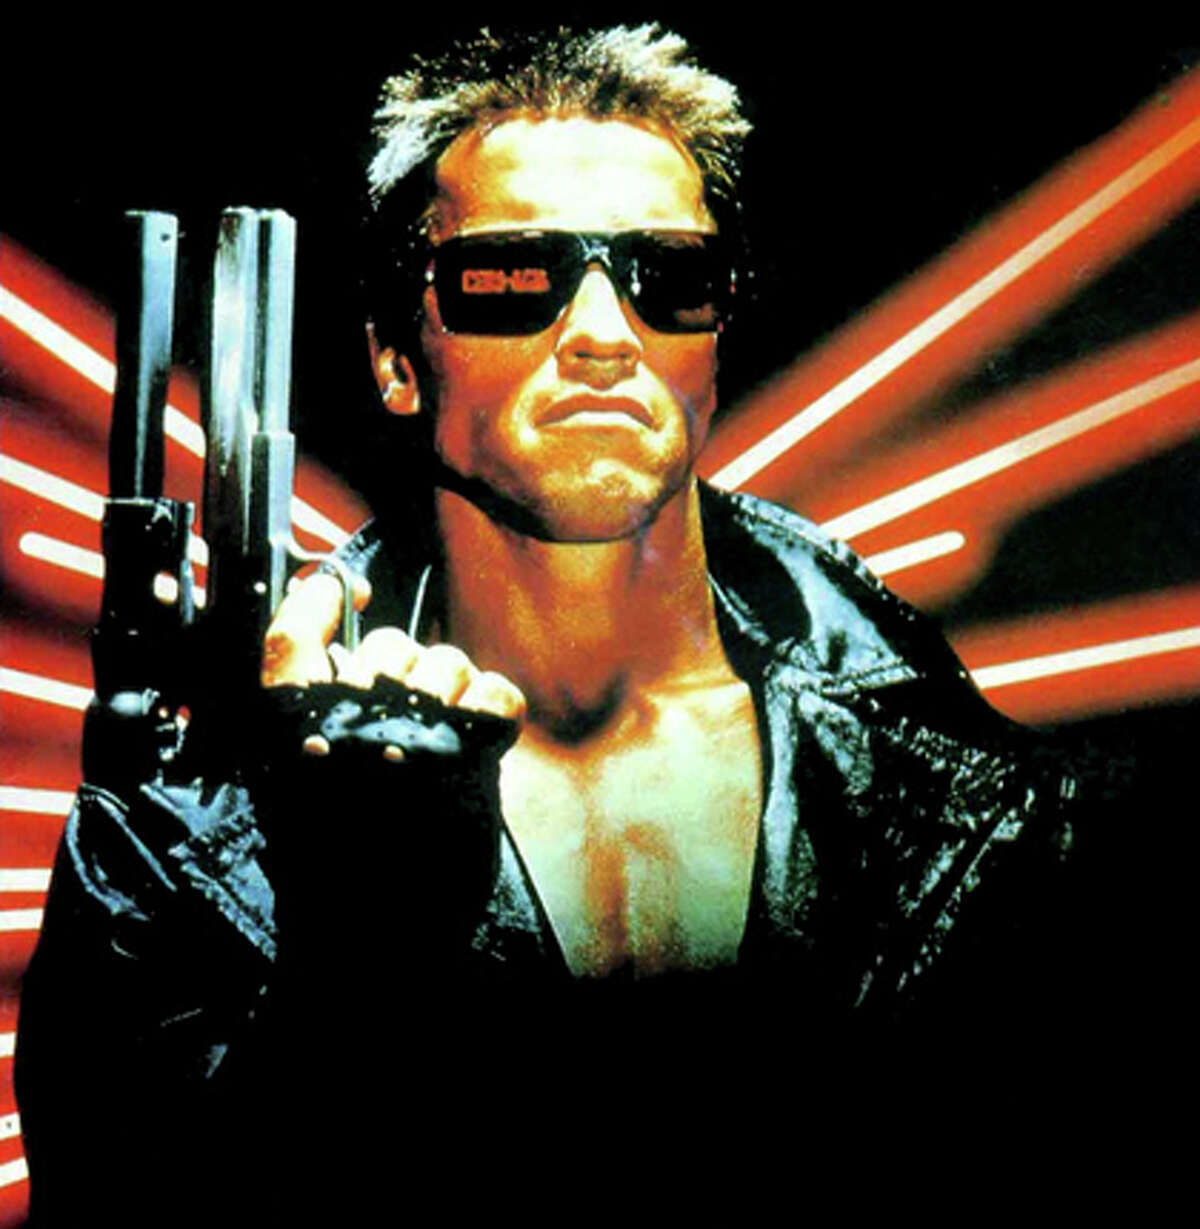 The Terminator Arnold Schwarzenegger starred as the cyborg with a mission in this 1985 film. It went on to be one of the most successful sci-fi franchises of all time.